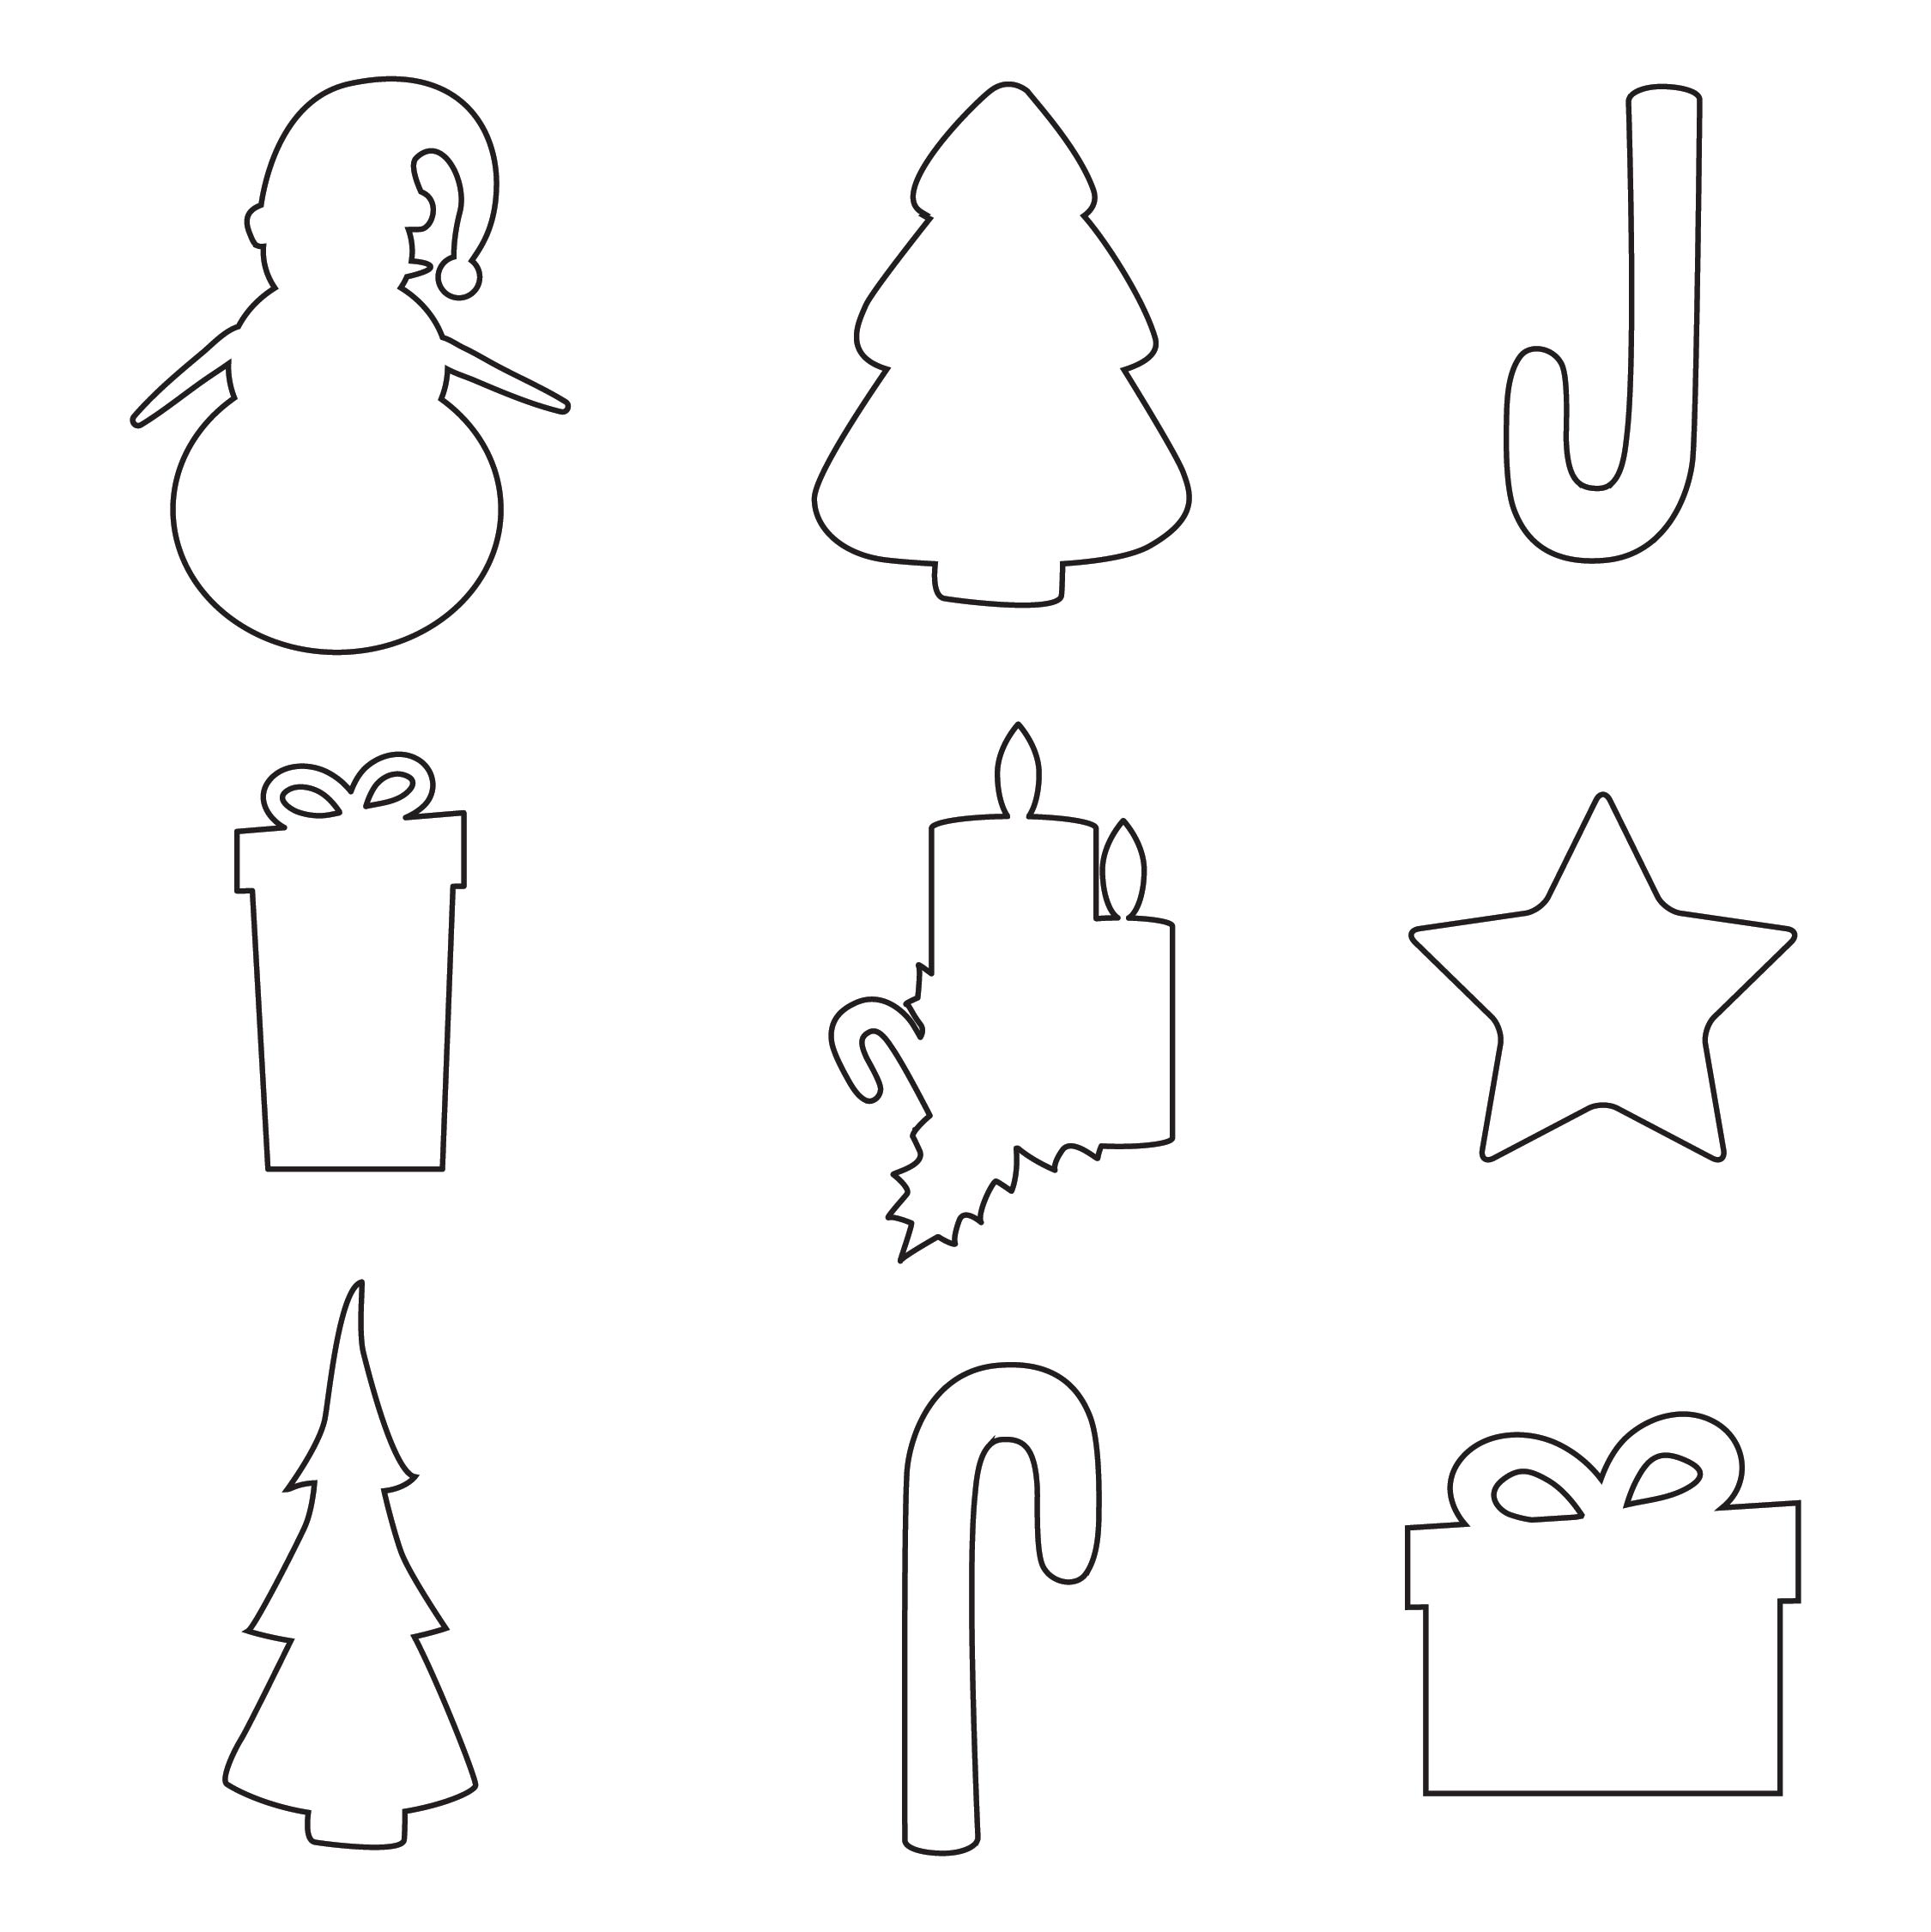 Printable Christmas Shapes to Cut Out